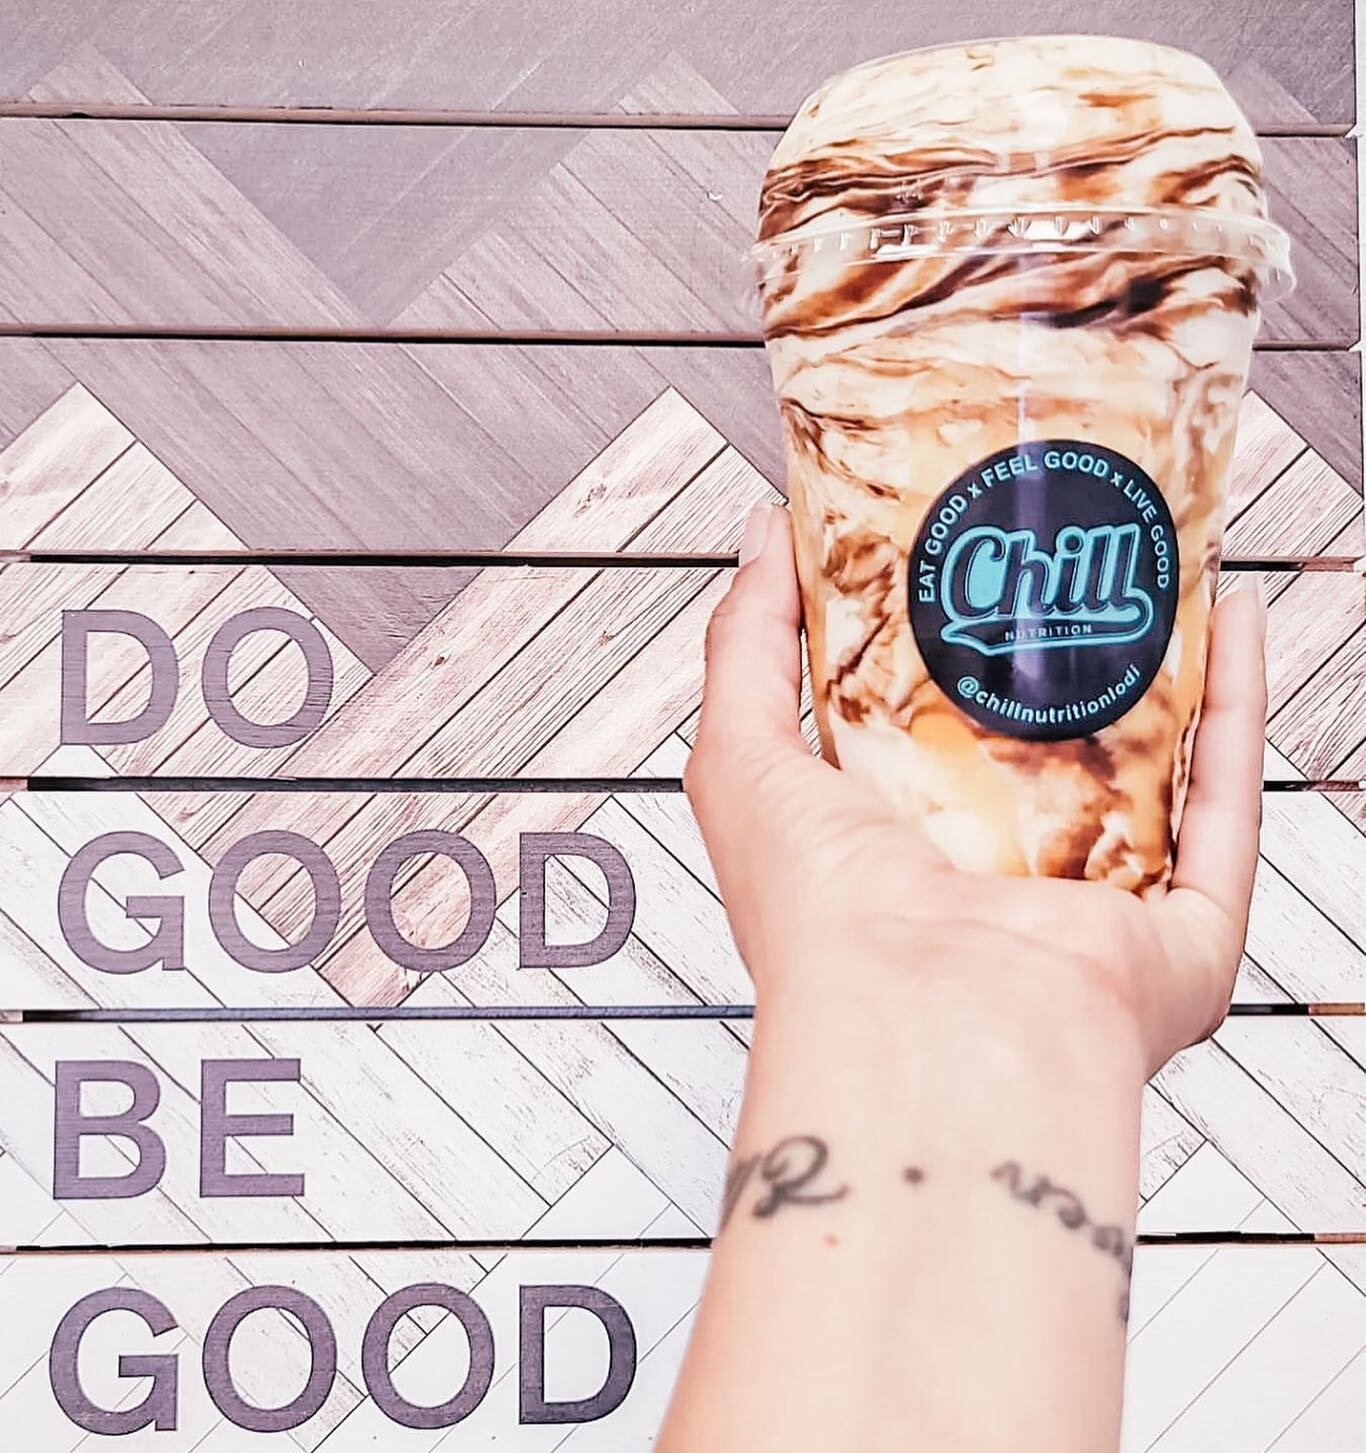 Our final day of MAY! 

Come through tomorrow for our very last day of May drinks! No exceptions! 

Comment below with your fave May drink! 

That June menu is about to drop though. Stay tuned&hellip;

#chillnutrition #lodi #mealshakes #energydrinks 